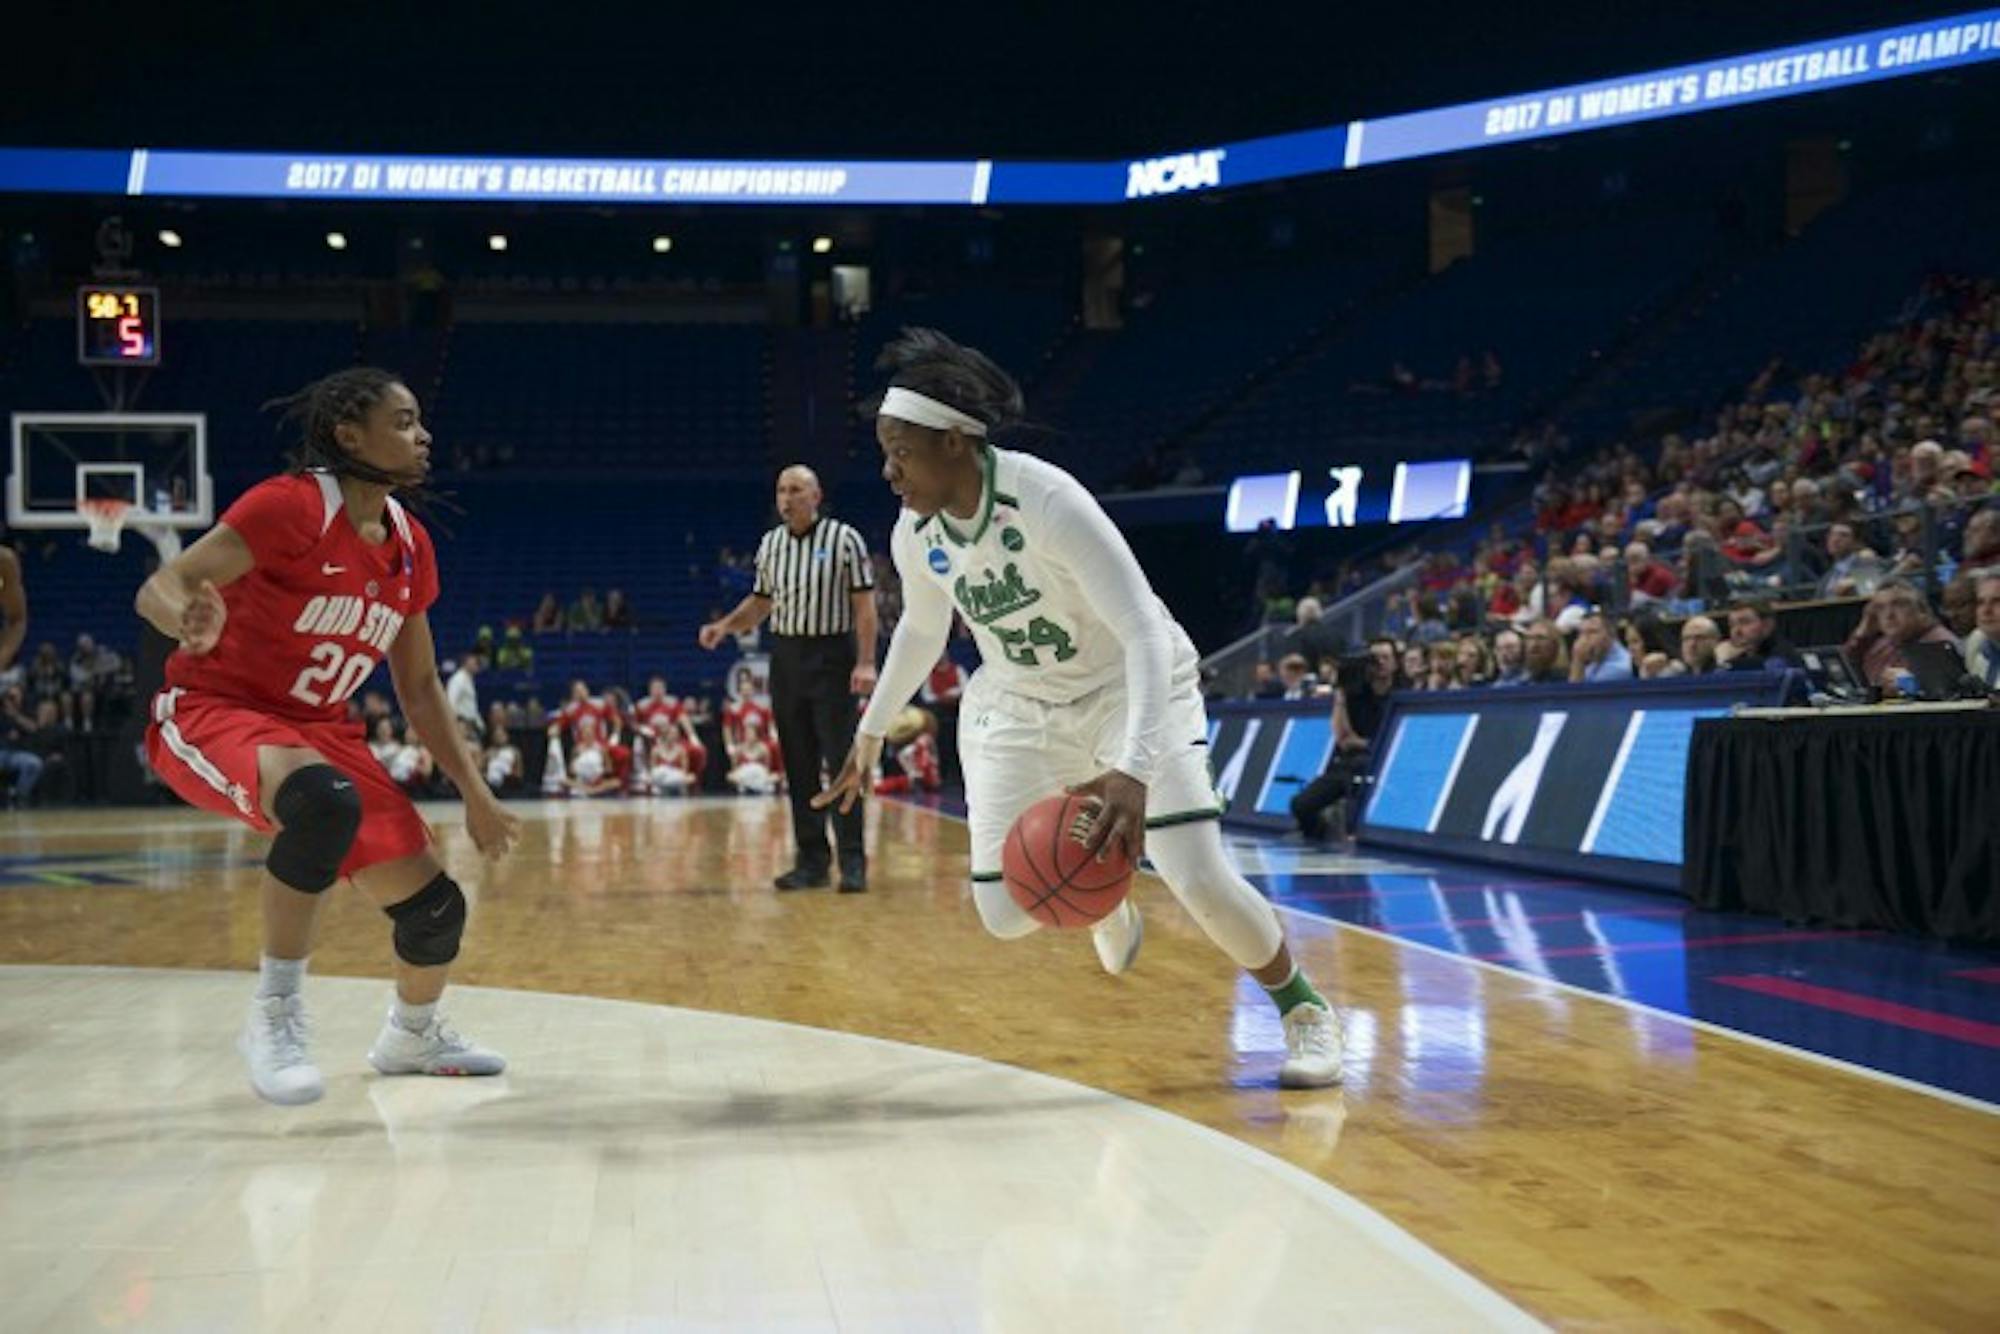 Irish sophomore guard Arike Ogunbowale drives to the basket during Notre Dame's 99-76 win over Ohio State on Friday at Rupp Arena in Lexington, Kentucky.